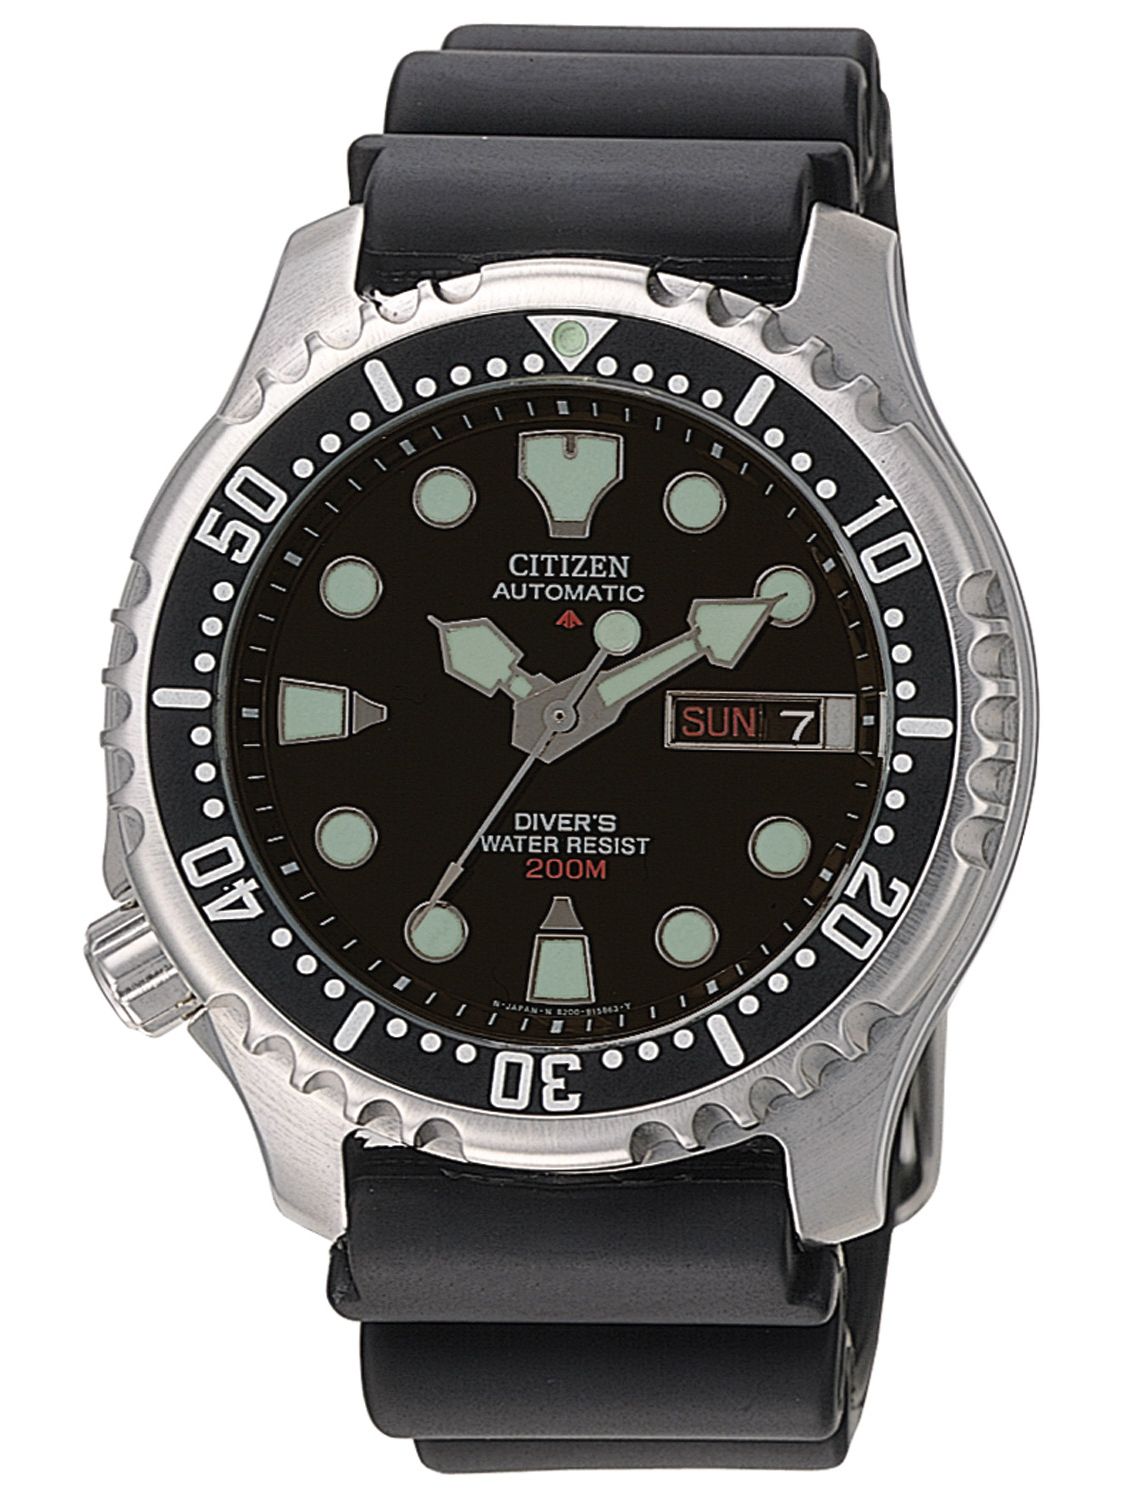 CITIZEN NY0040-09EE Promaster Automatic Diver Watch